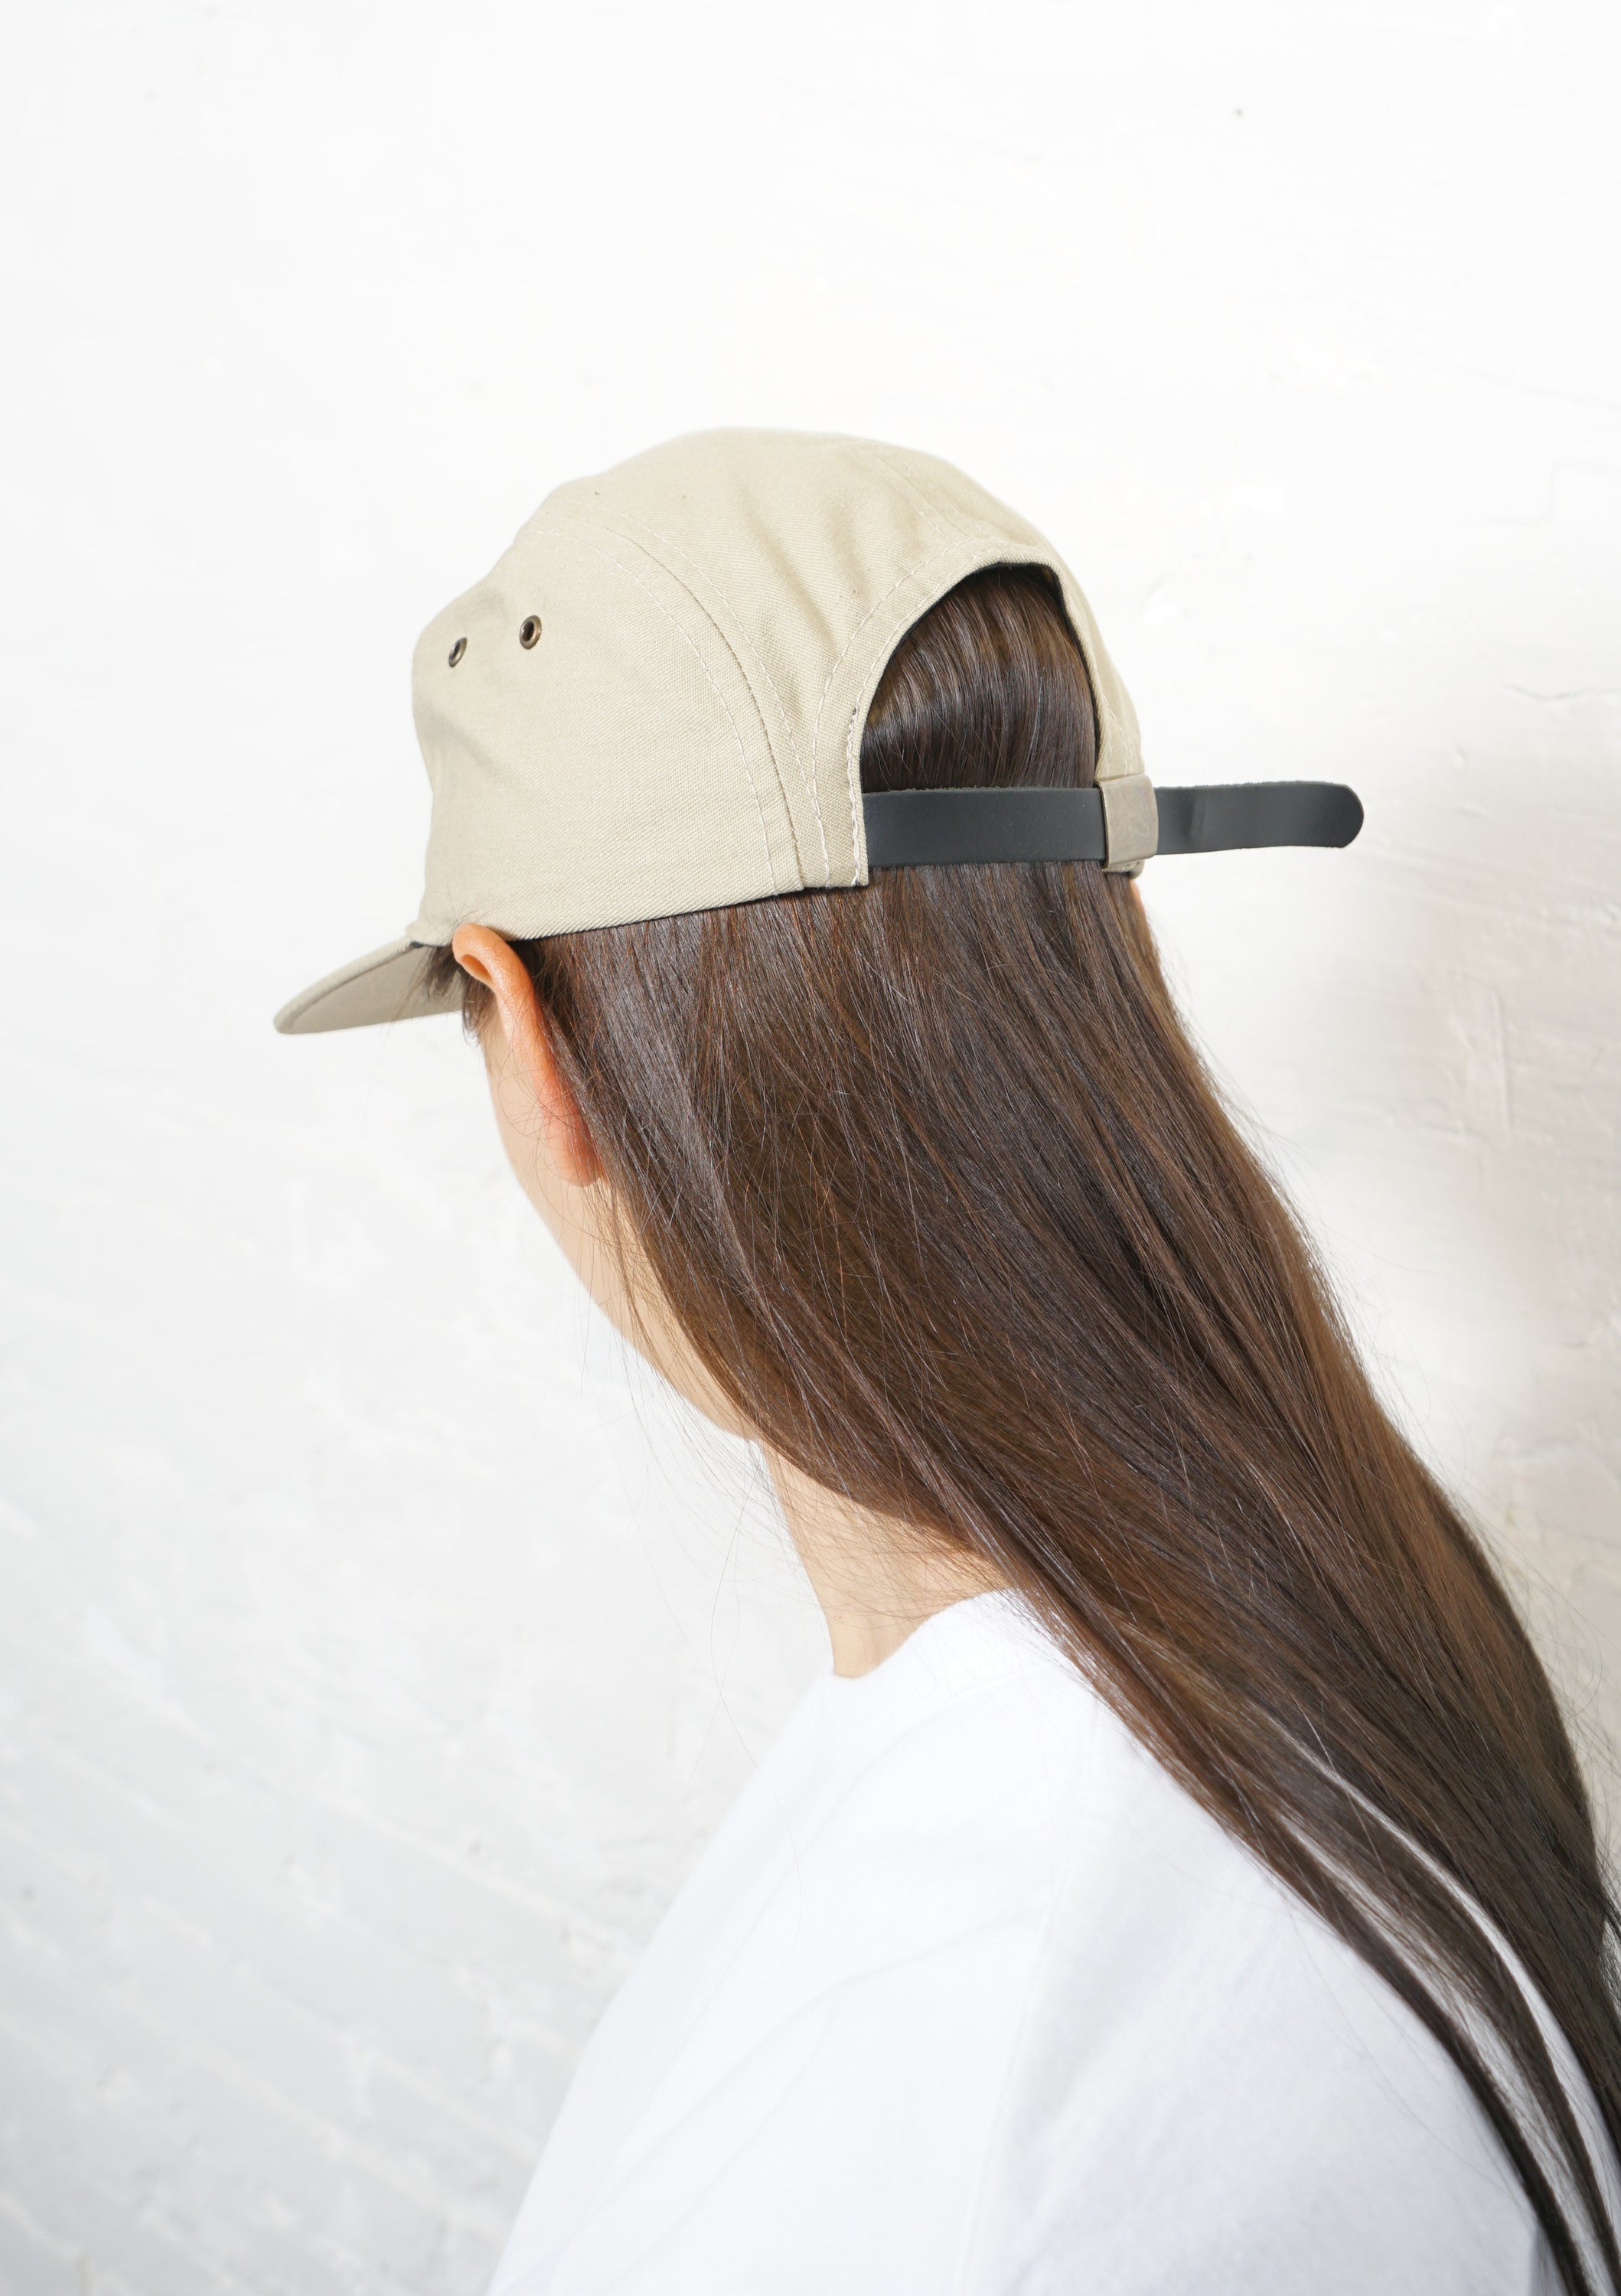 5-Panel Cap Made in USA